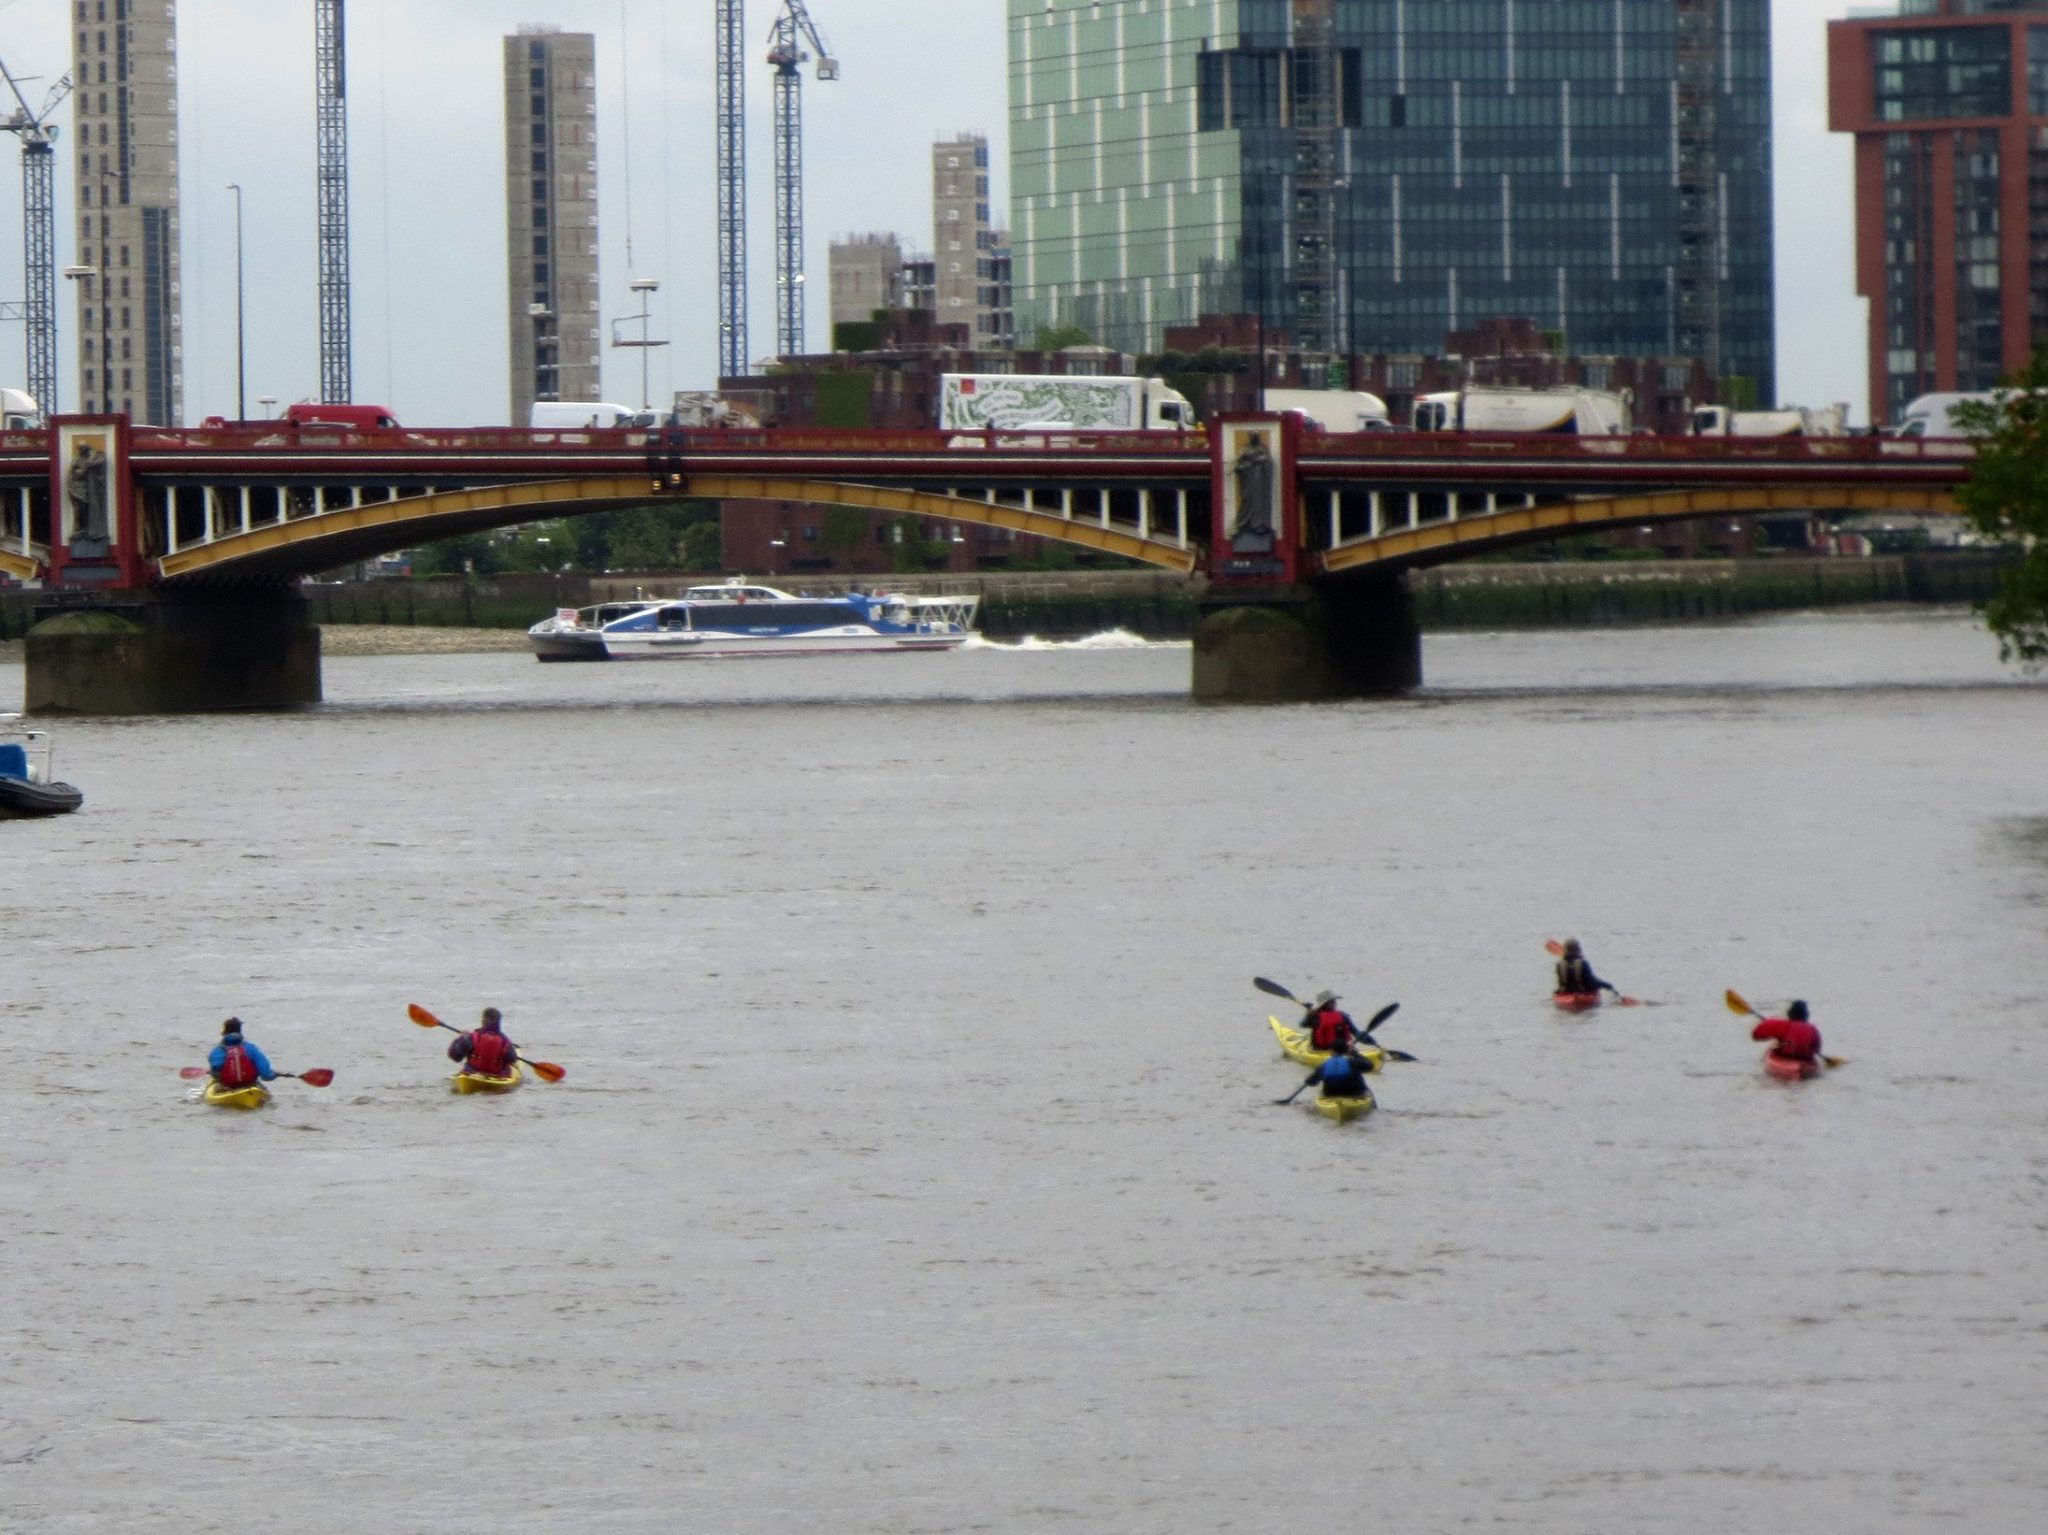 Kayakers on the Thames